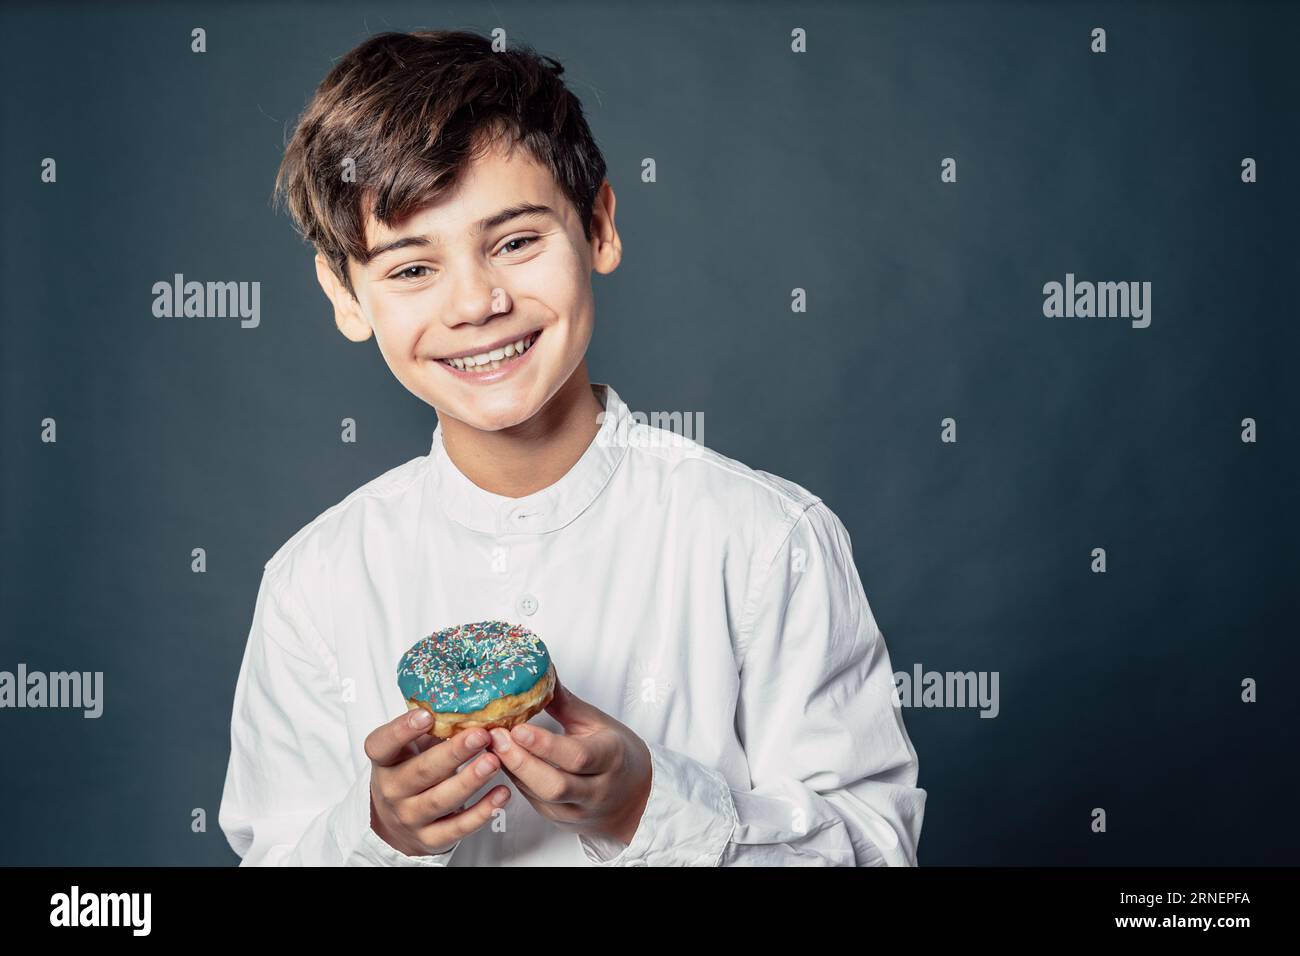 teen boy with donut is happy about sugar snack that makes his childhood joyful and sweet Stock Photo